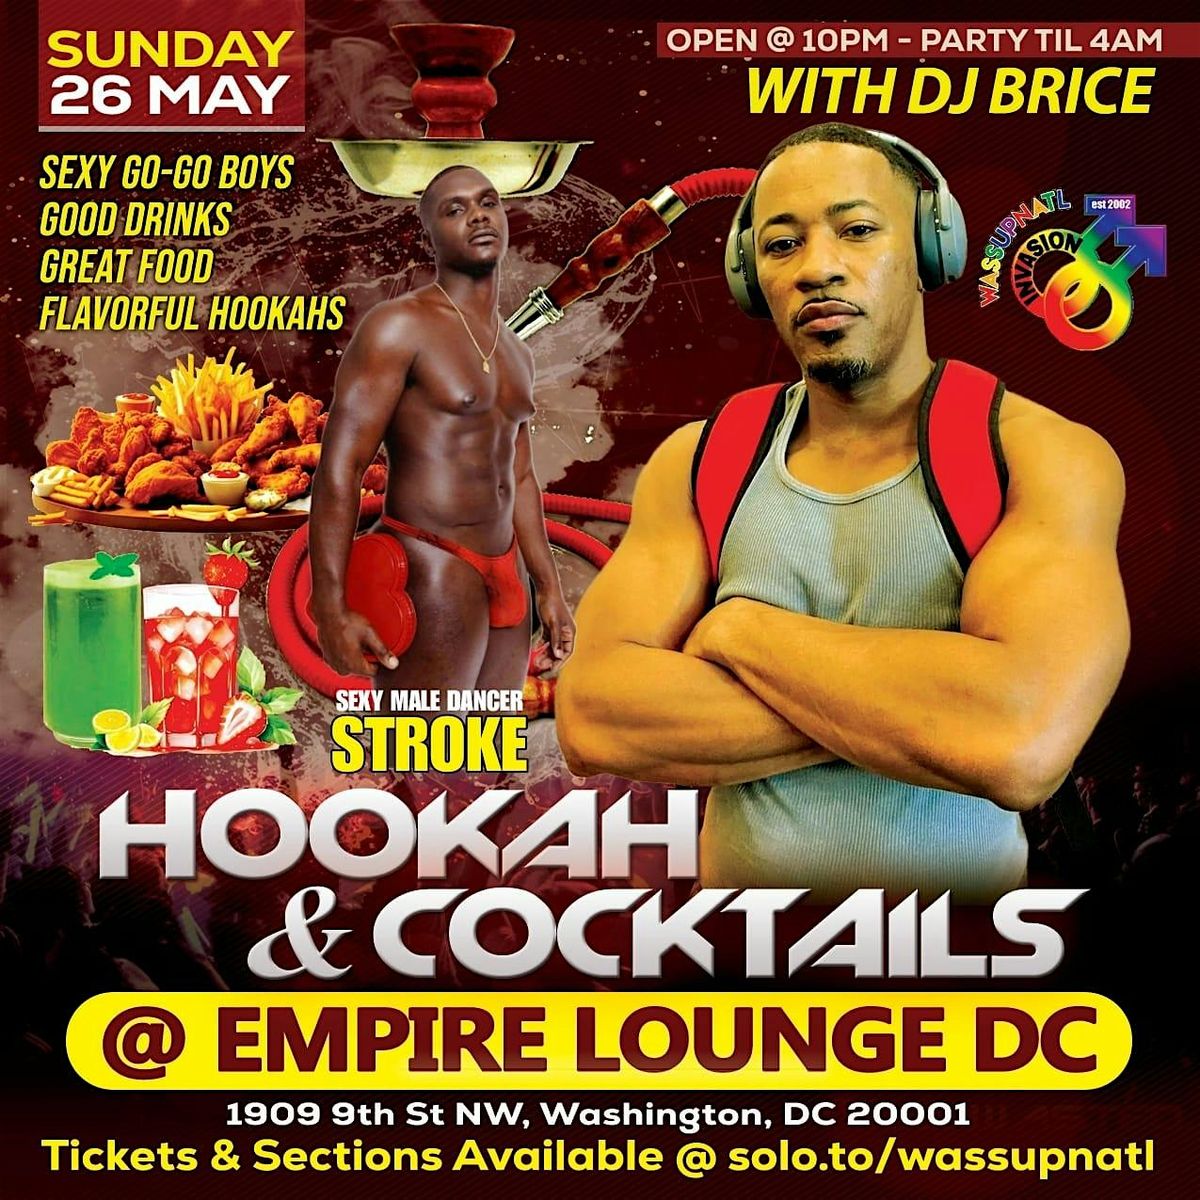 HOOKAHS AND COCKTAILS @ EMPIRE LOUNGE DC 1909 9th St NW, Washington, DC